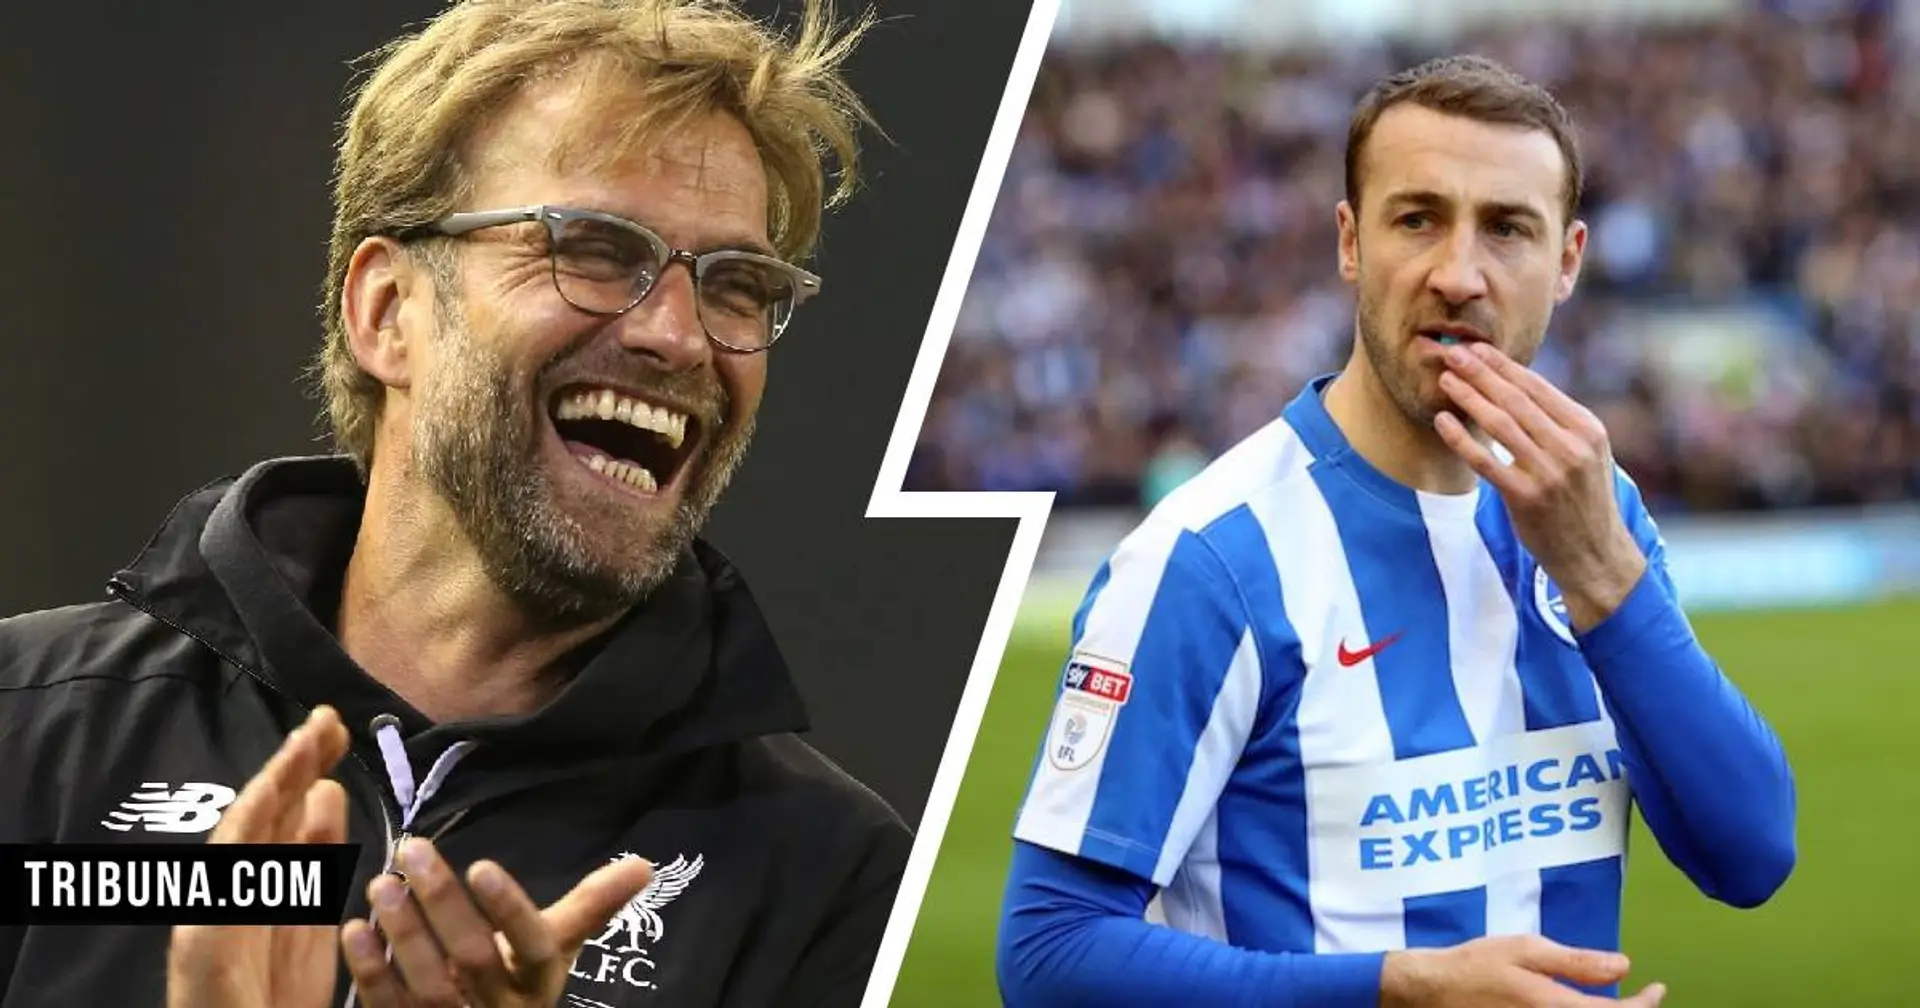 Brighton striker Murray explains funny Klopp habit that psyches out opposing players before matches